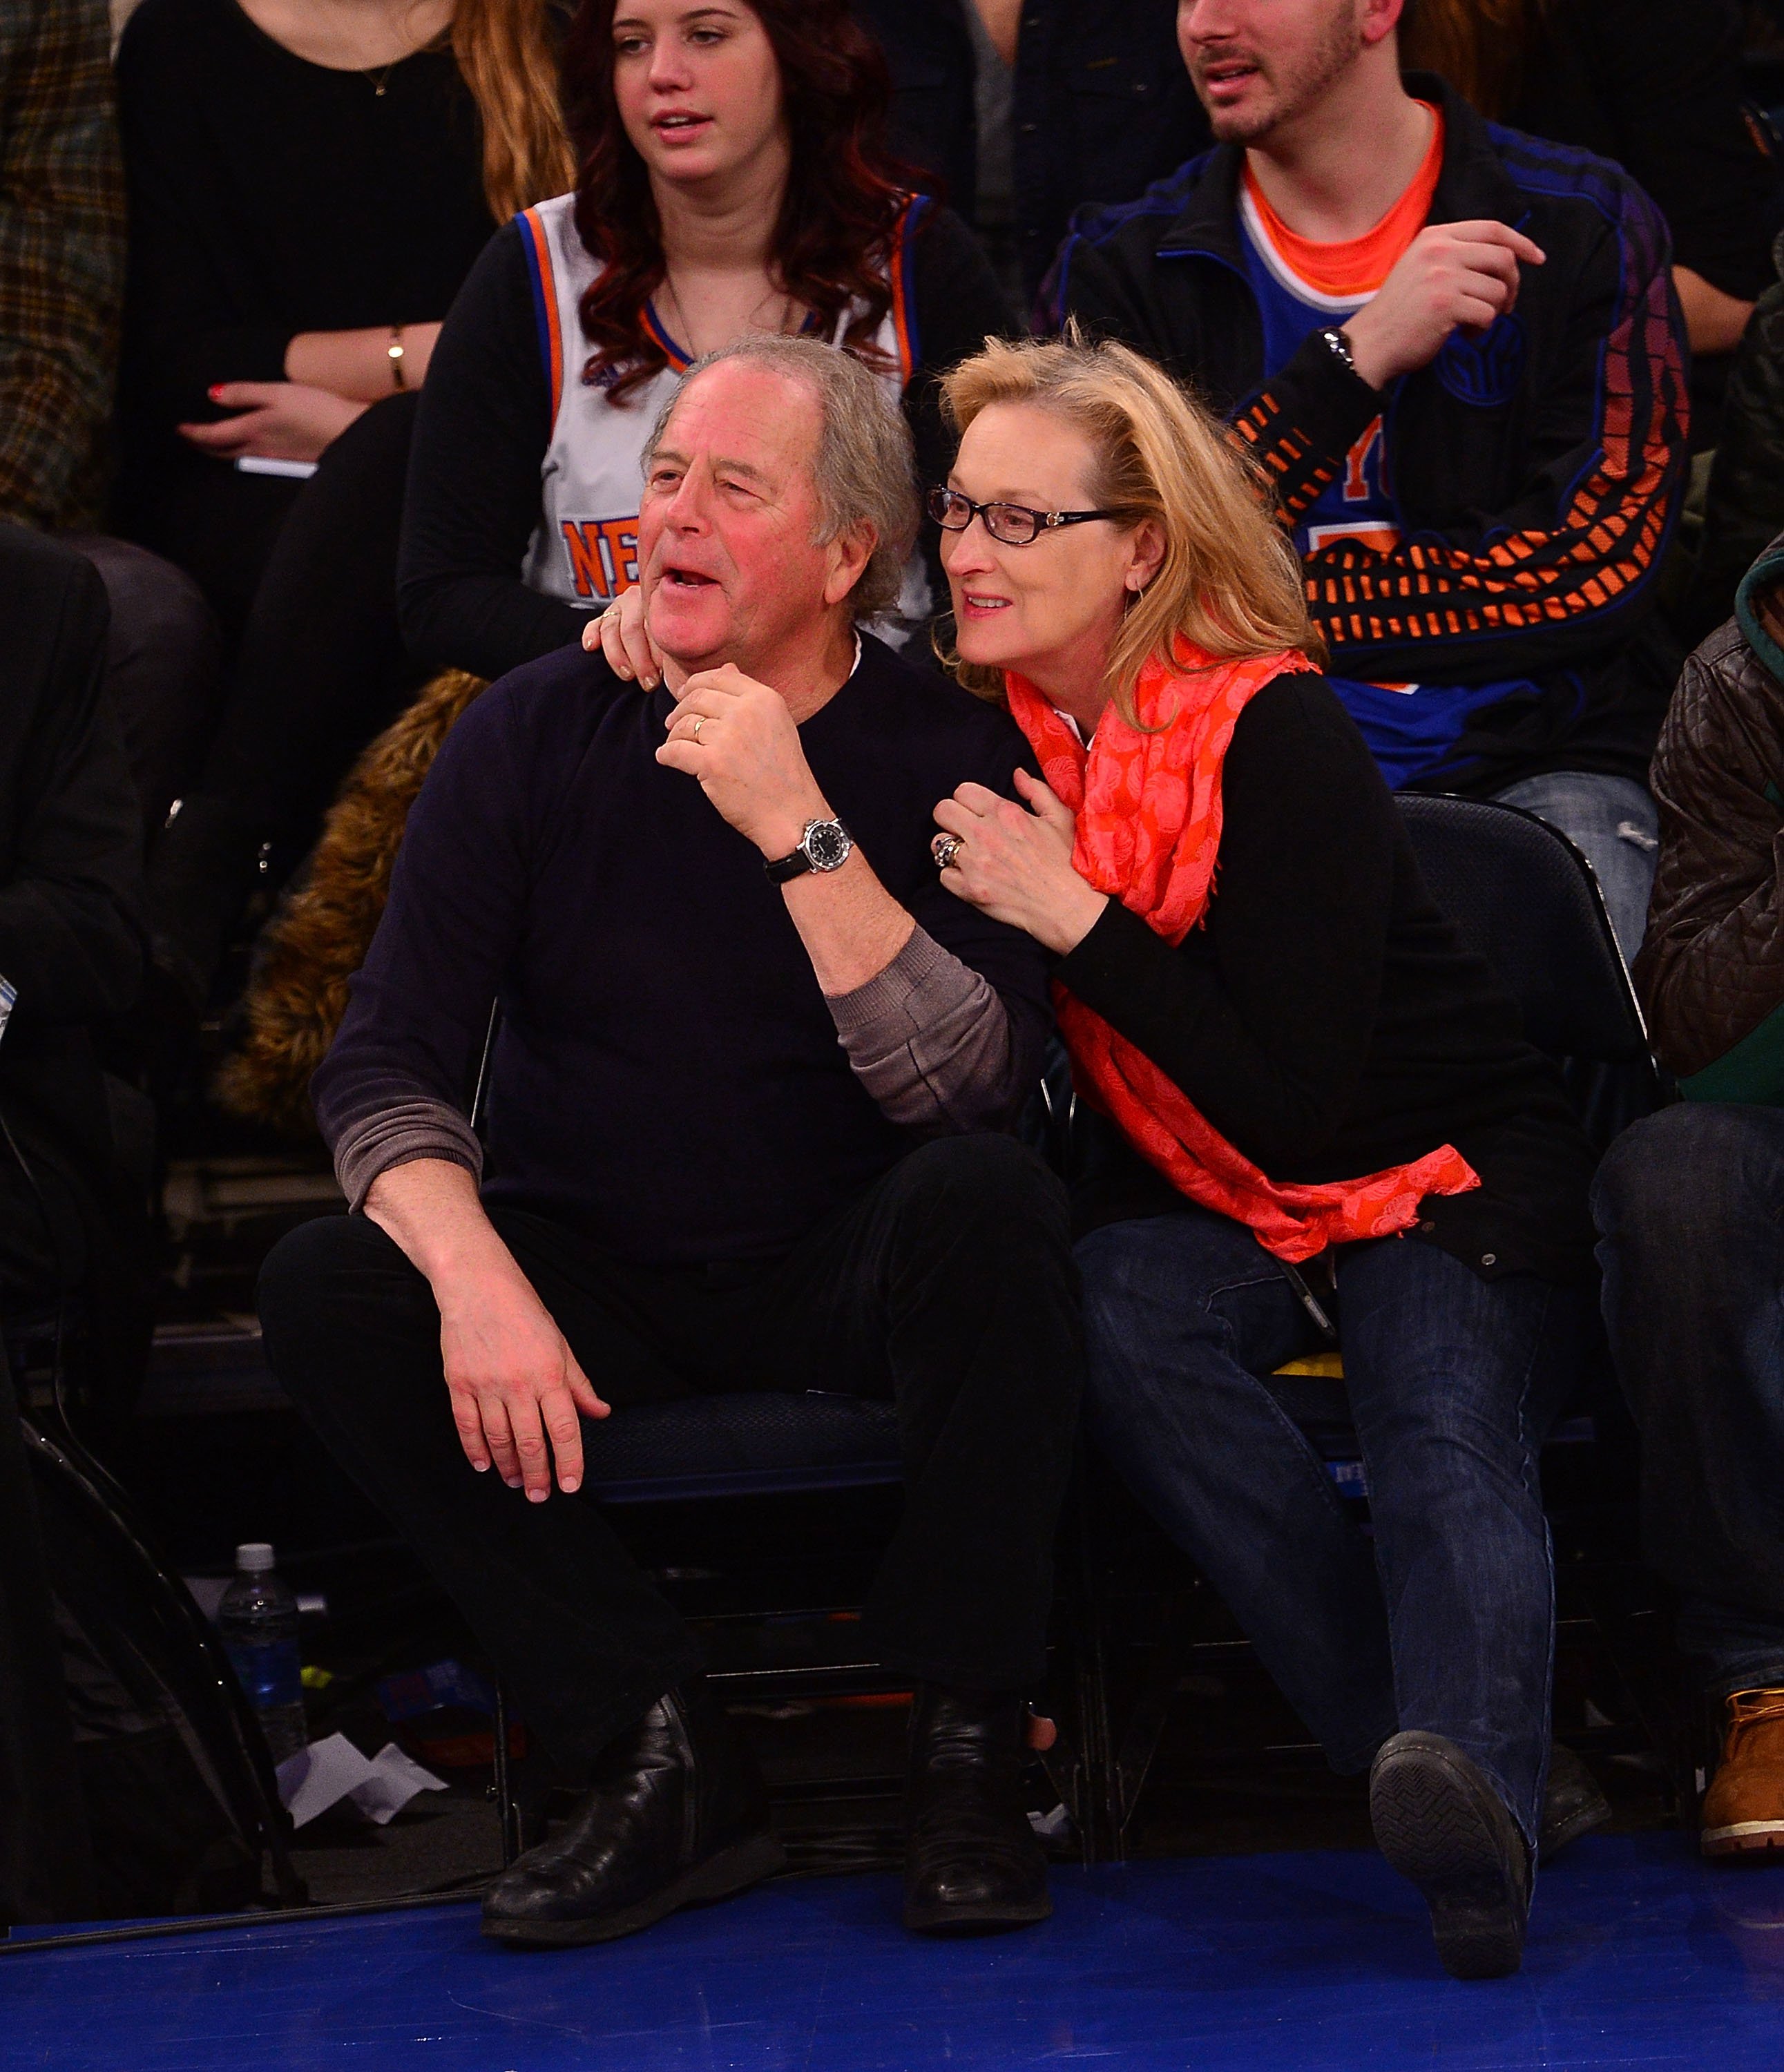 Don Gummer and Meryl Streep attend the LA Lakers vs NY Knicks game in New York City on January 26, 2014 | Photo: Getty Images